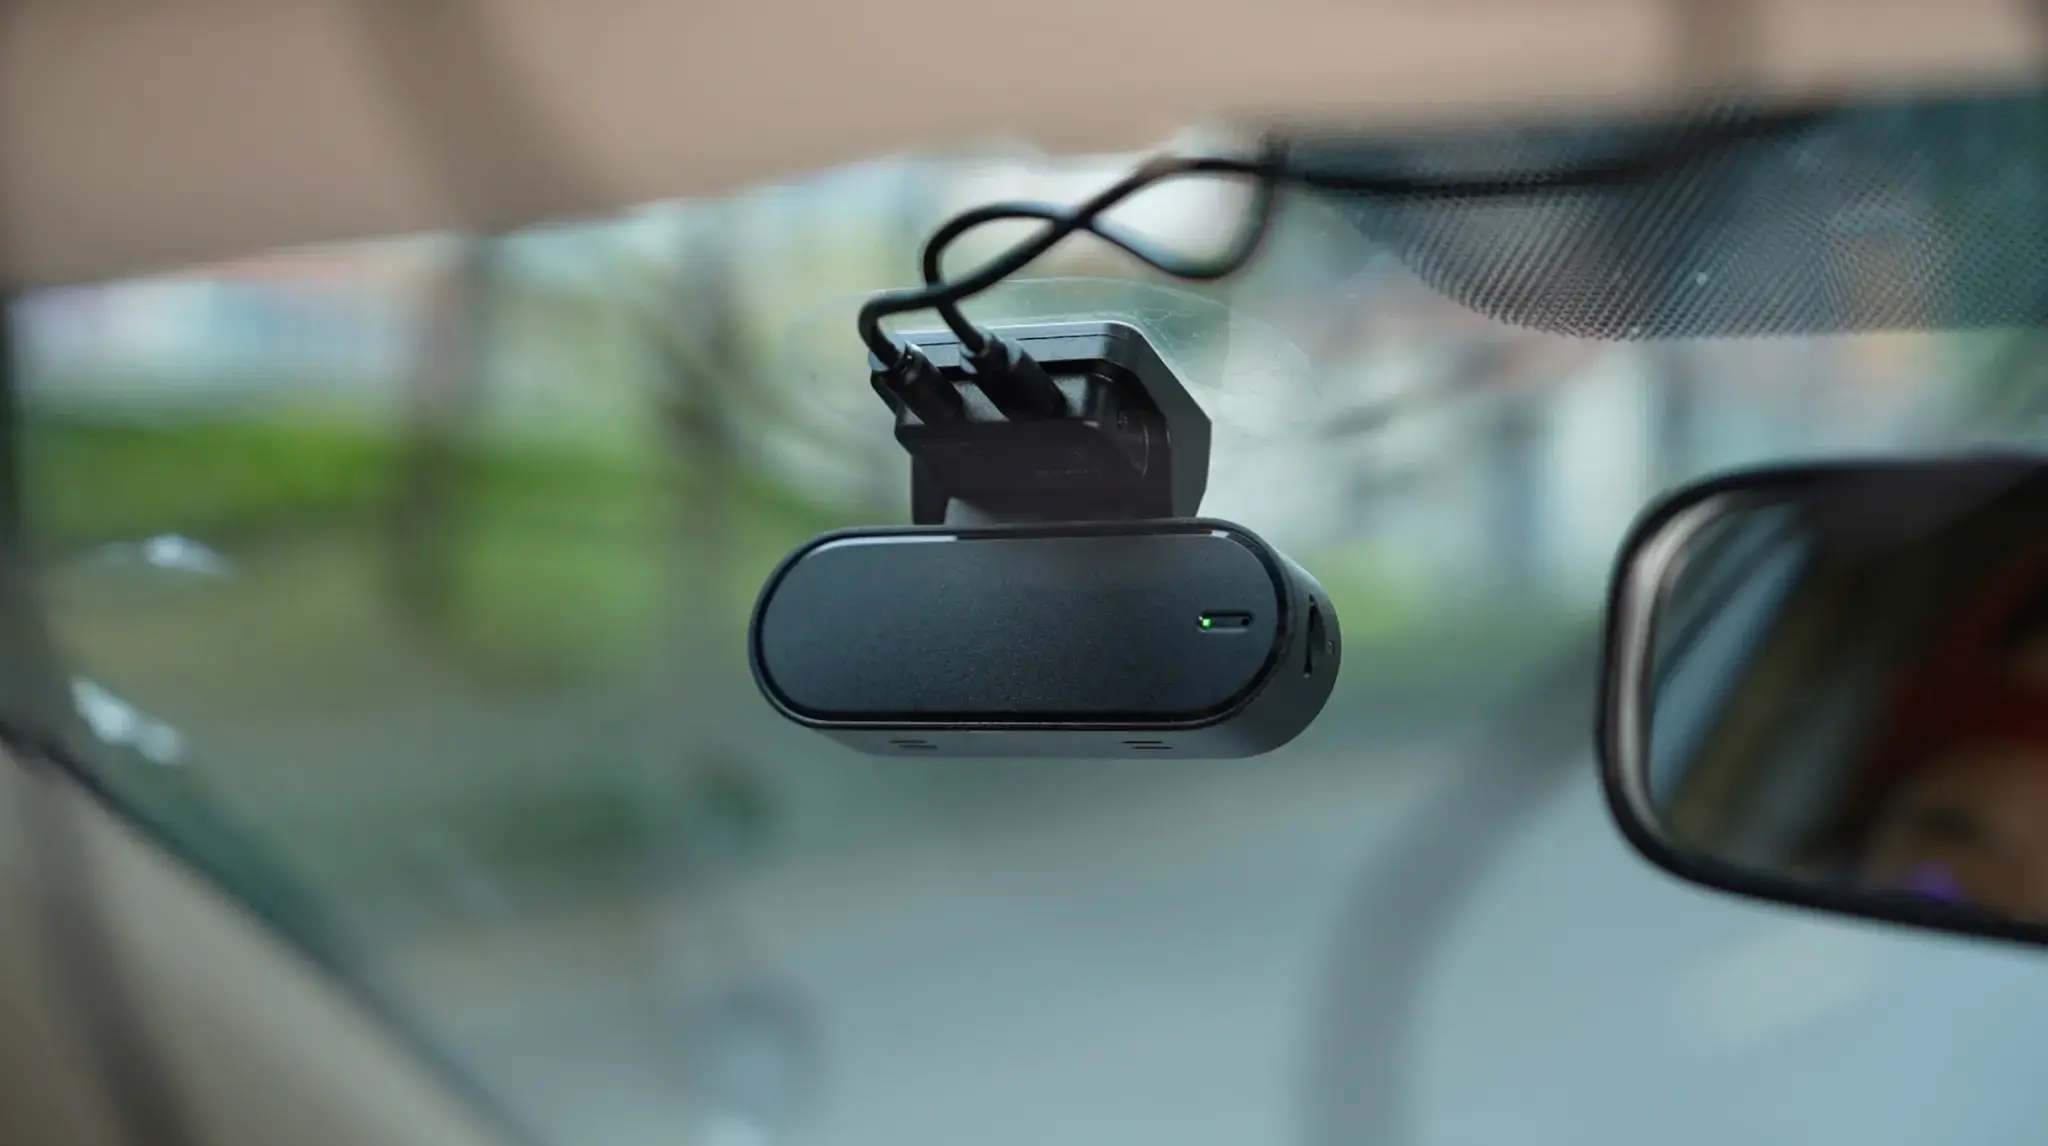 DDPAI N5 Dual 4K dash cam mounted on car windshield capturing the road view.